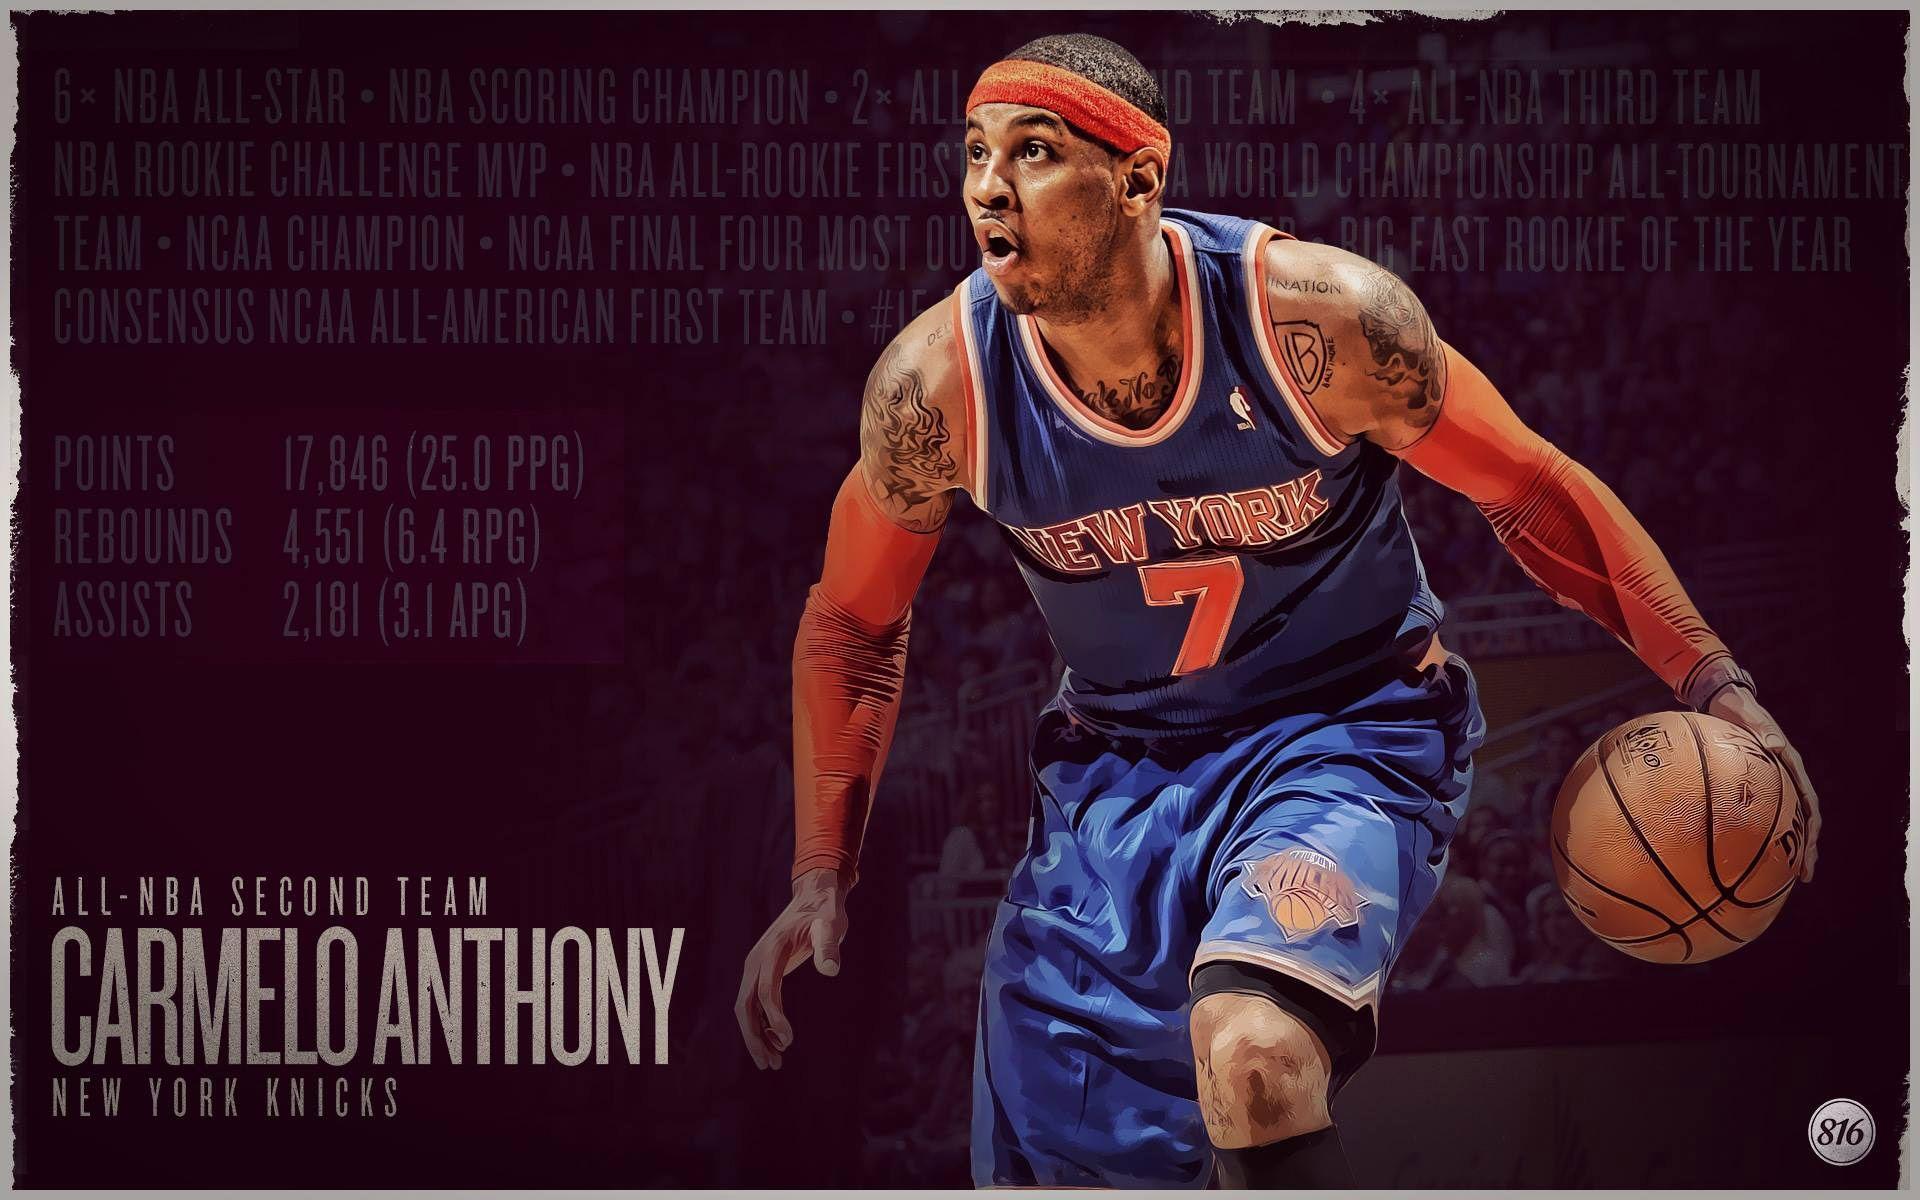 Carmelo Anthon New York Knicks Says Hello Brooklyn This Is Our